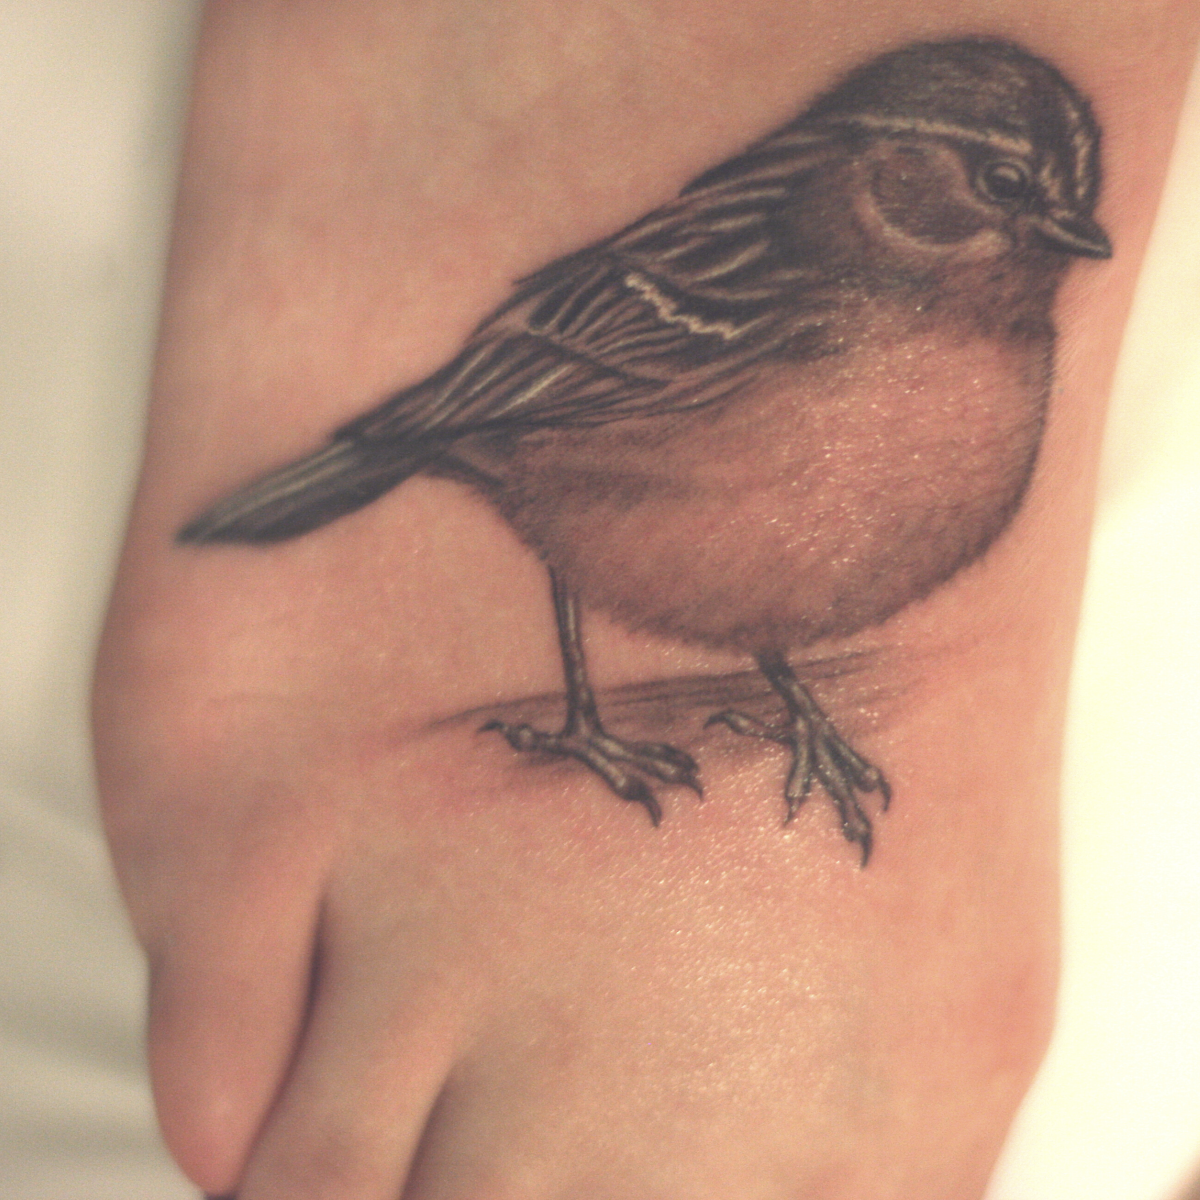 Sparrow tattoo on the foot.